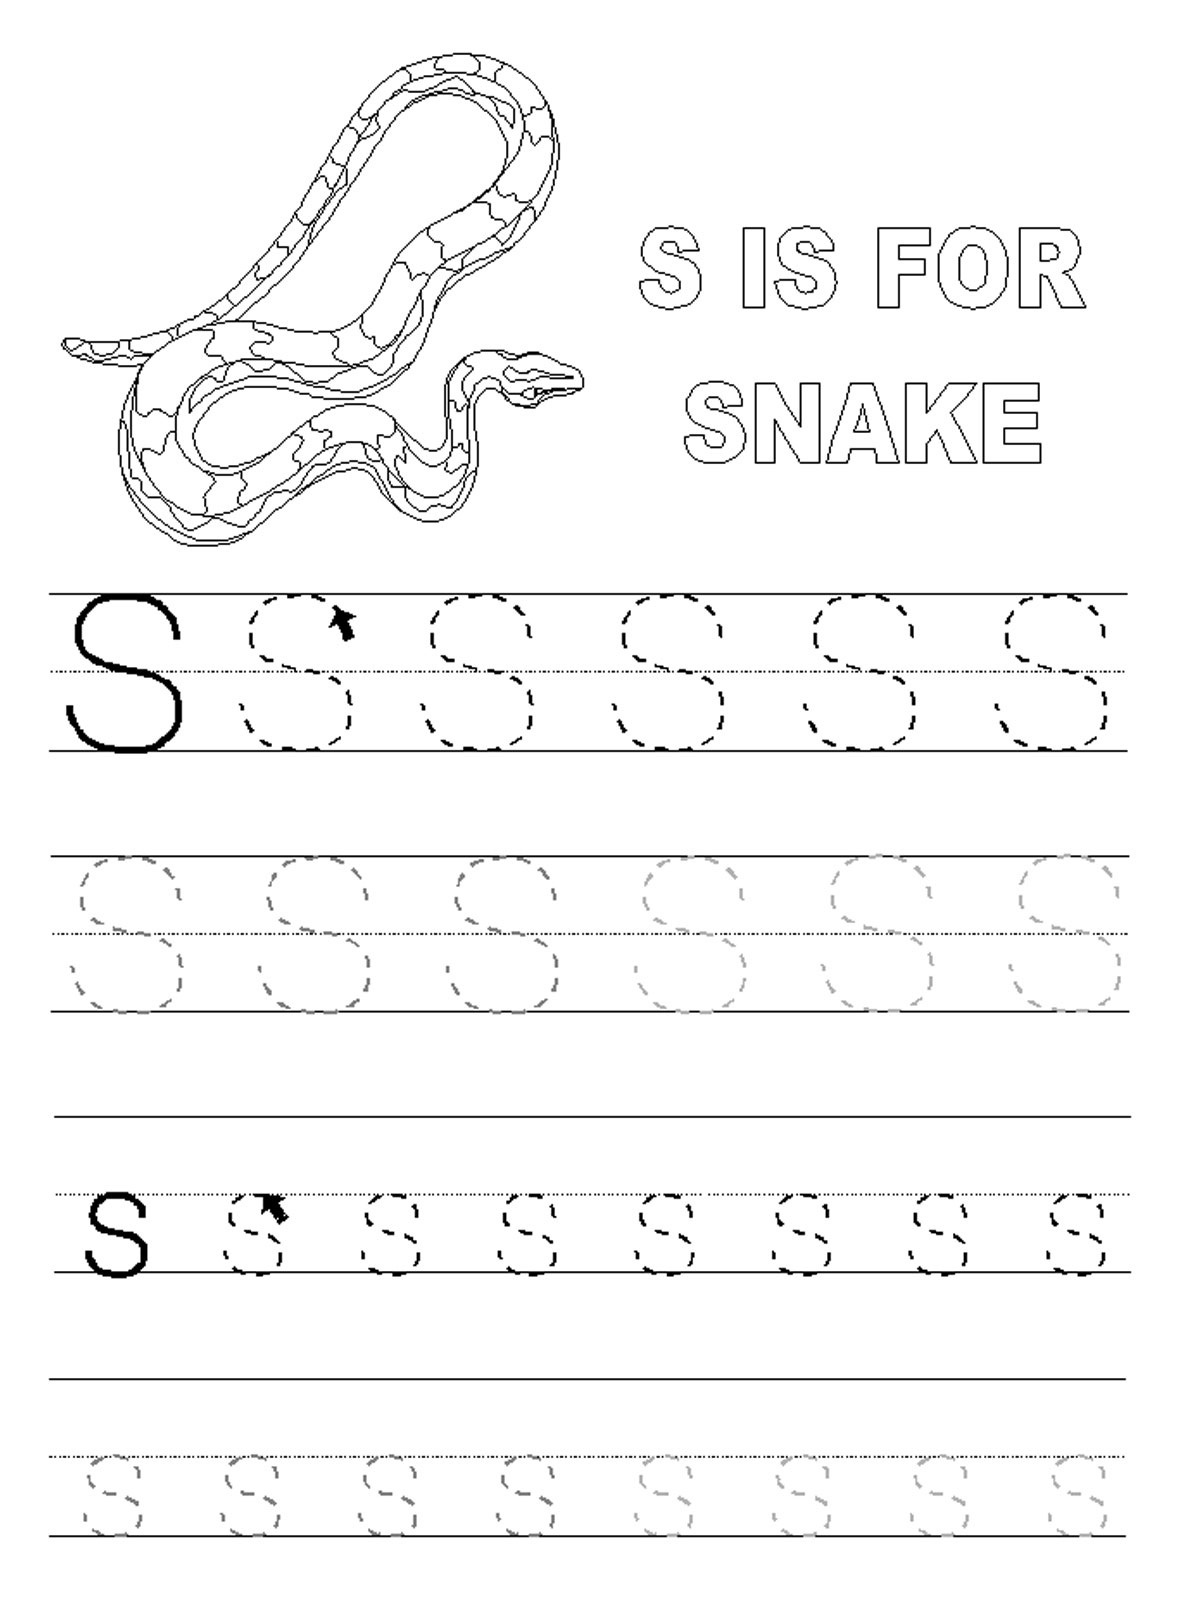 tracing-the-letter-s-worksheet-letter-tracing-worksheets